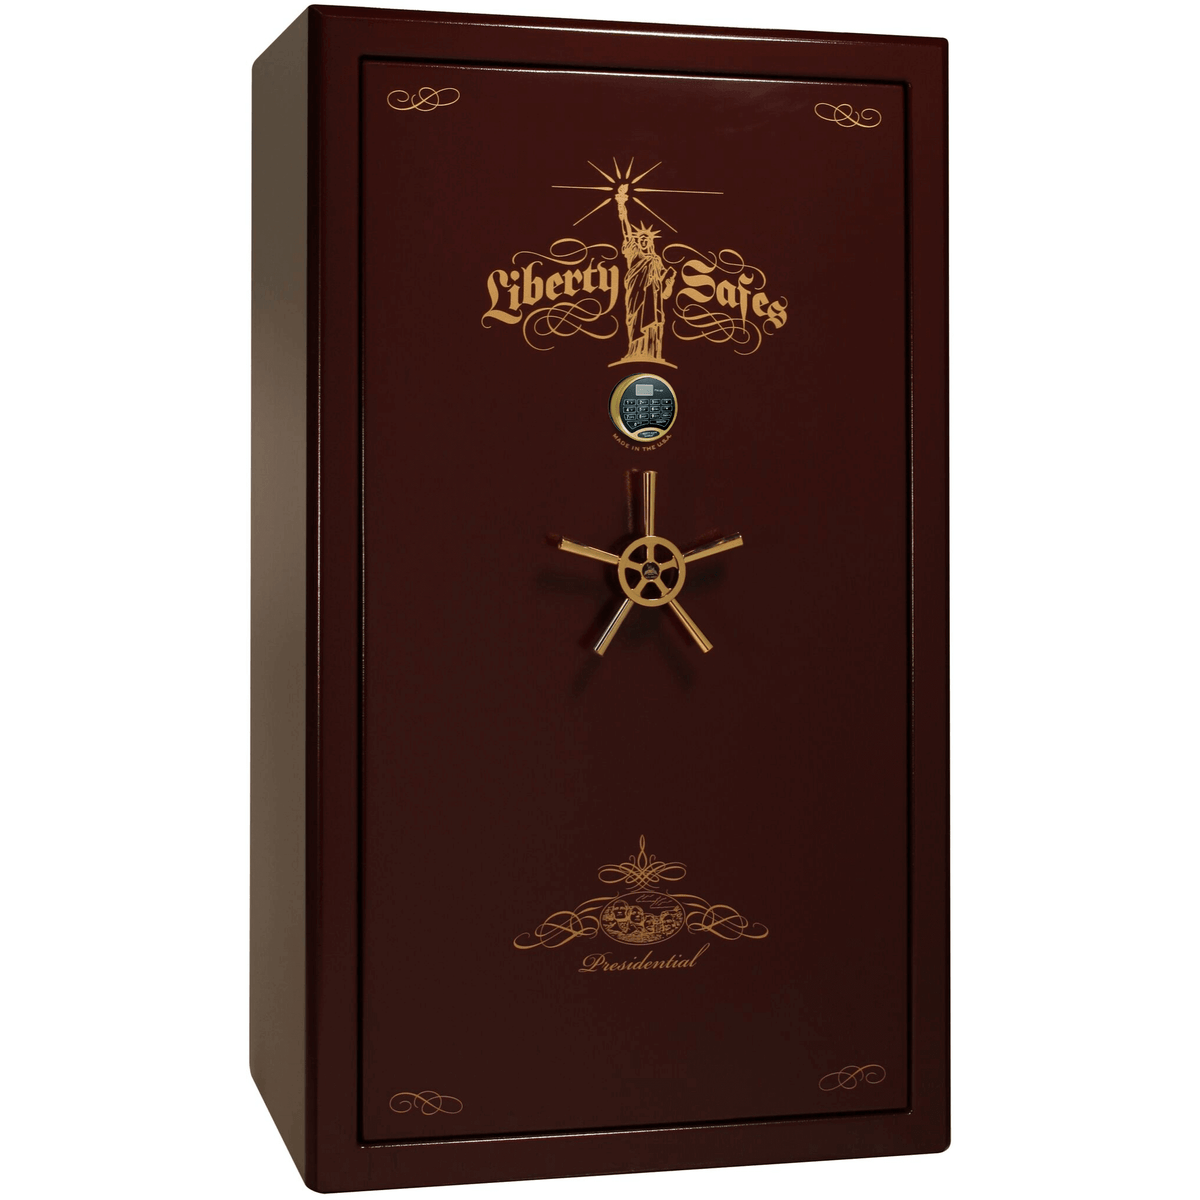 Liberty Safe Presidential 50 in Burgundy Marble with 24k Gold Electronic Lock, closed door.